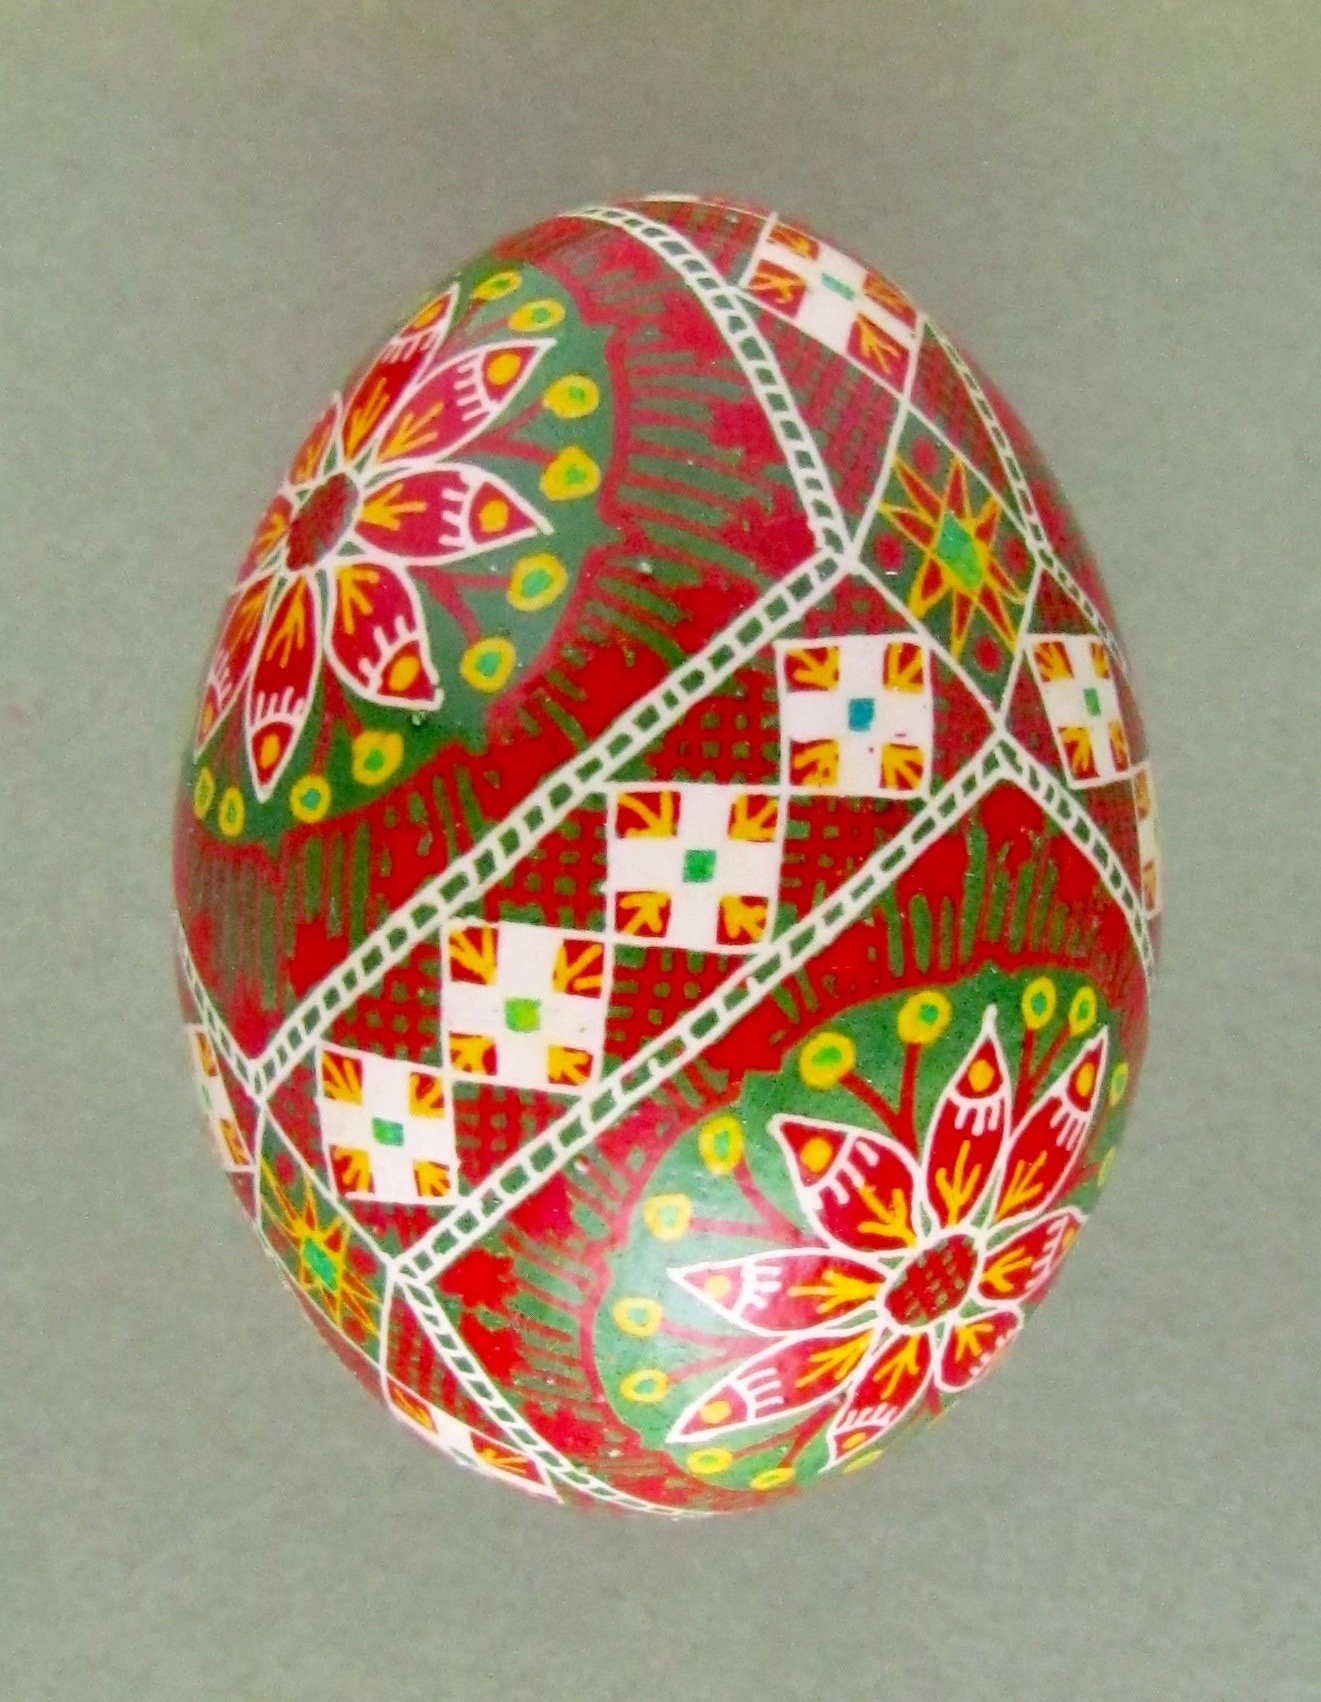 Wooden Eggs, Pysanky Design - pack of 5 - Ancient Faith Store